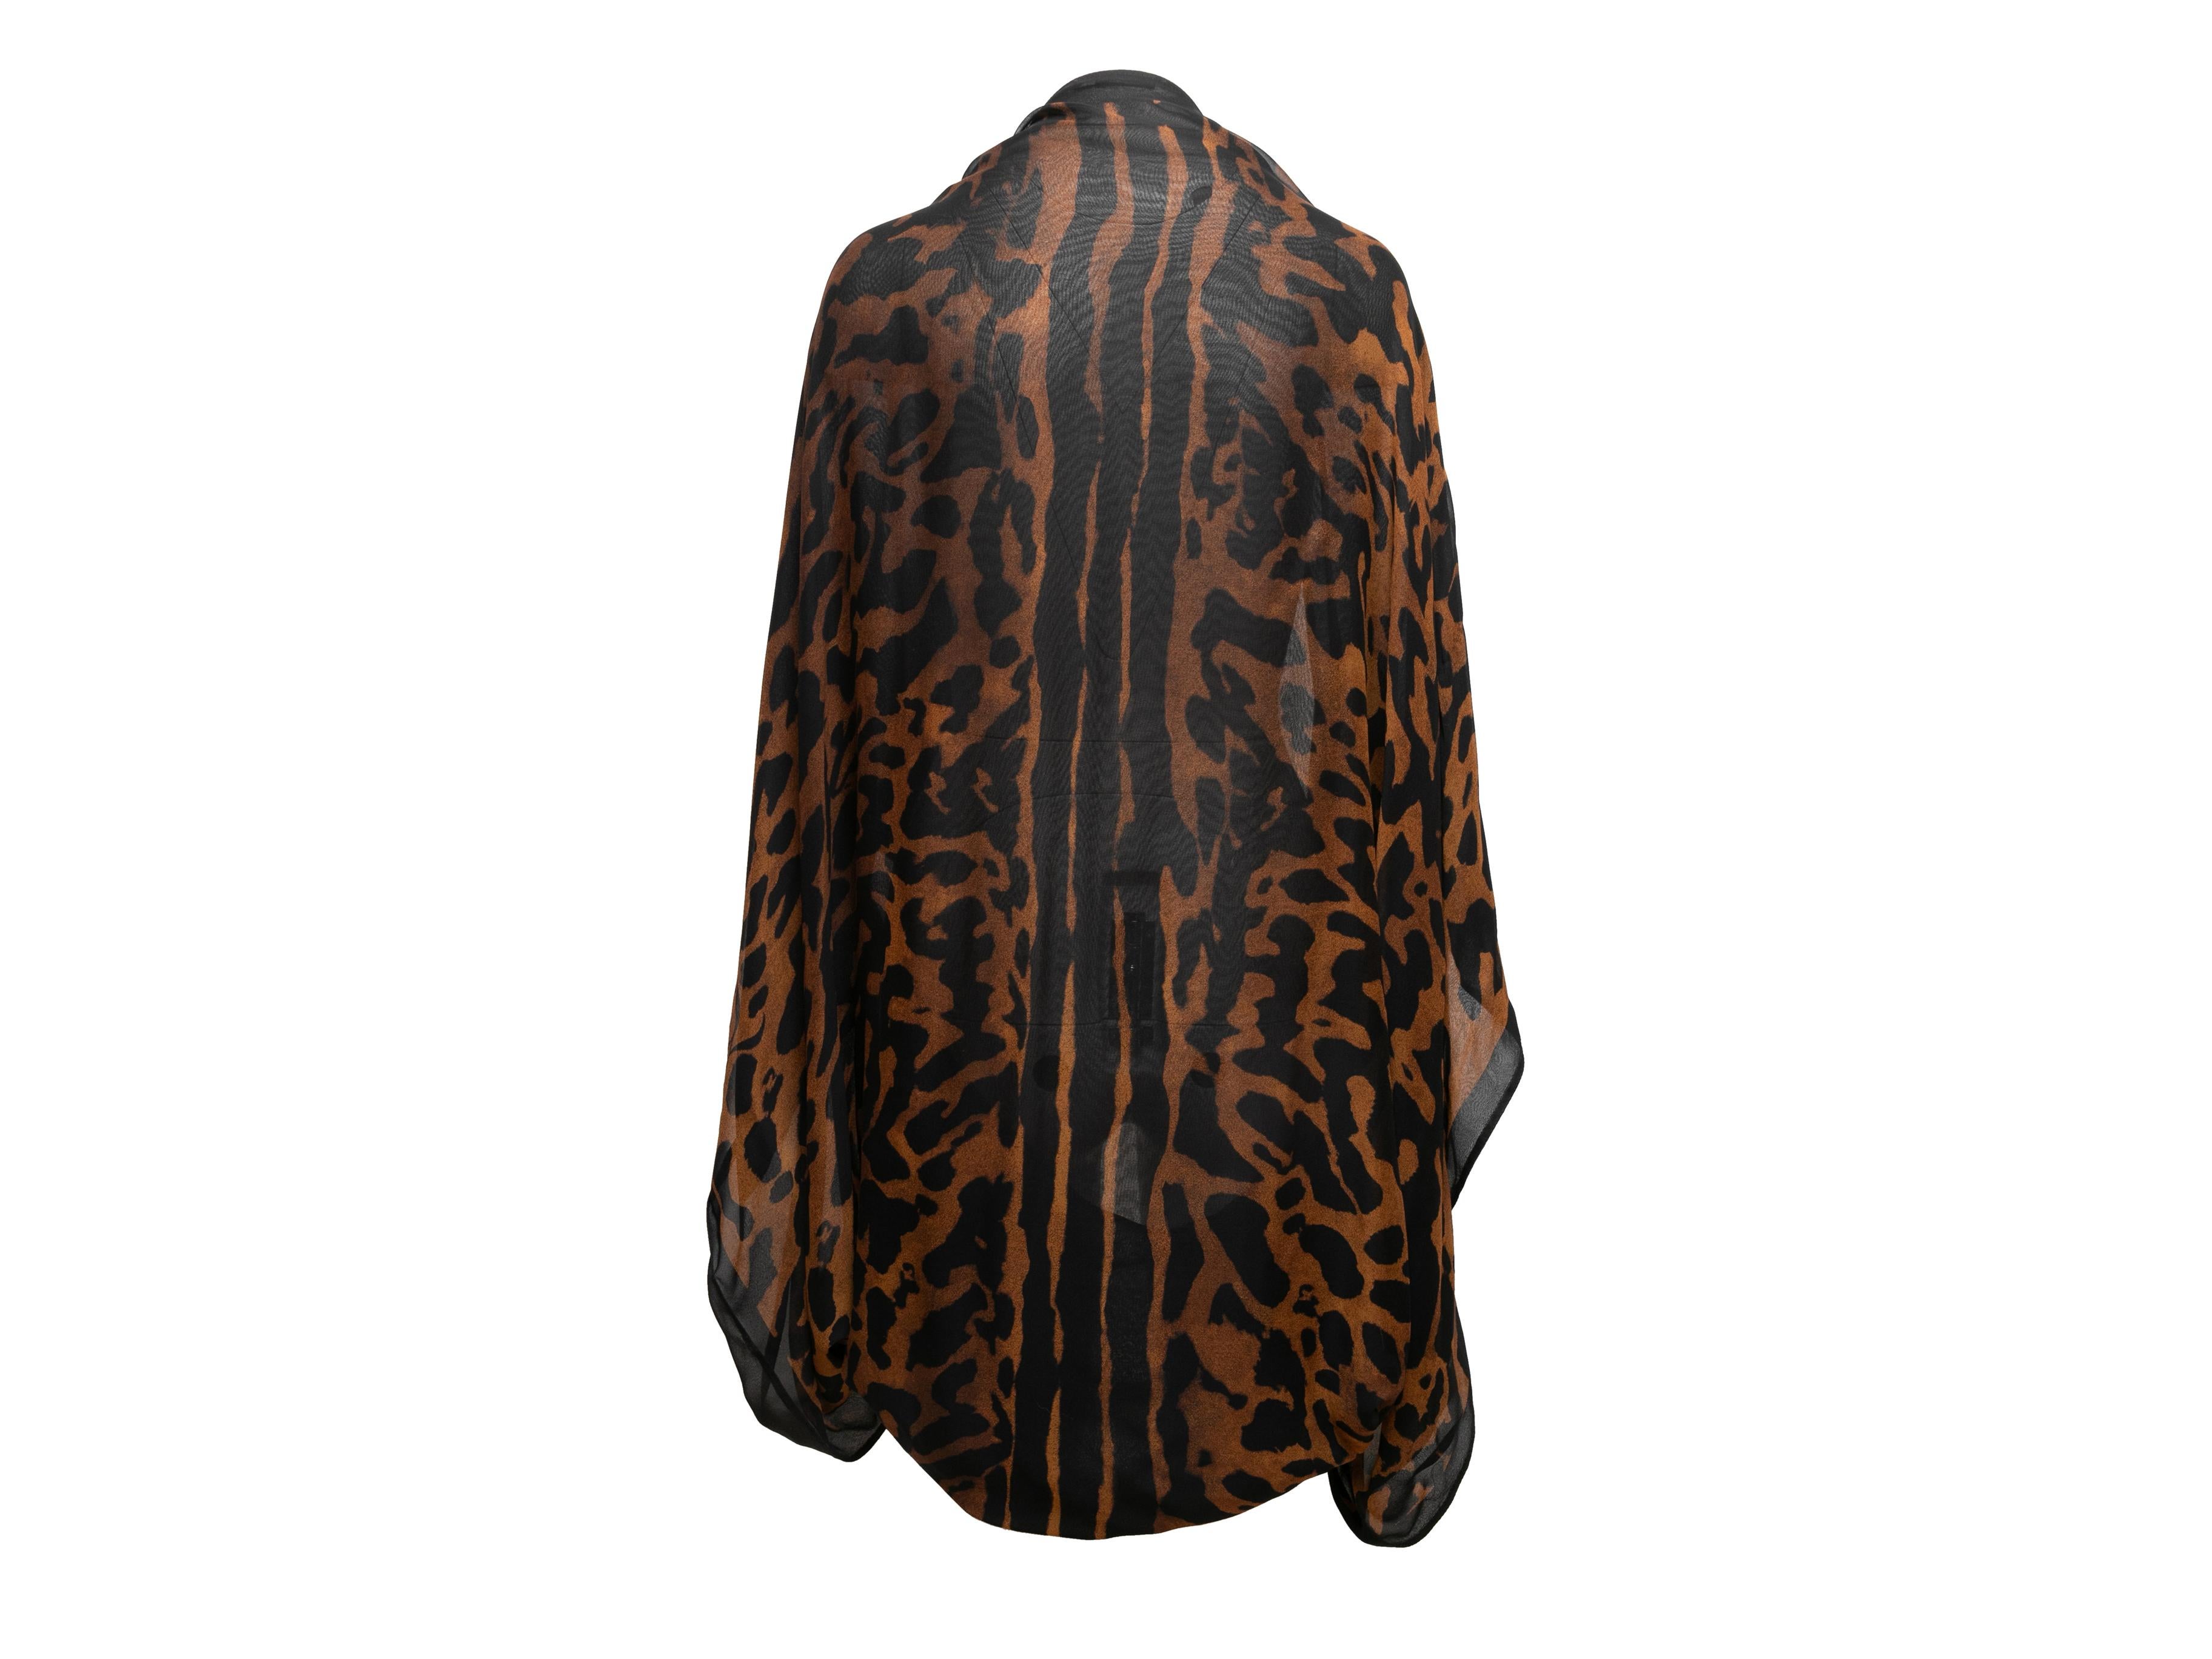  Vintage Black & Brown Alexander McQueen Leopard Print Shrug Size O/S In Good Condition For Sale In New York, NY